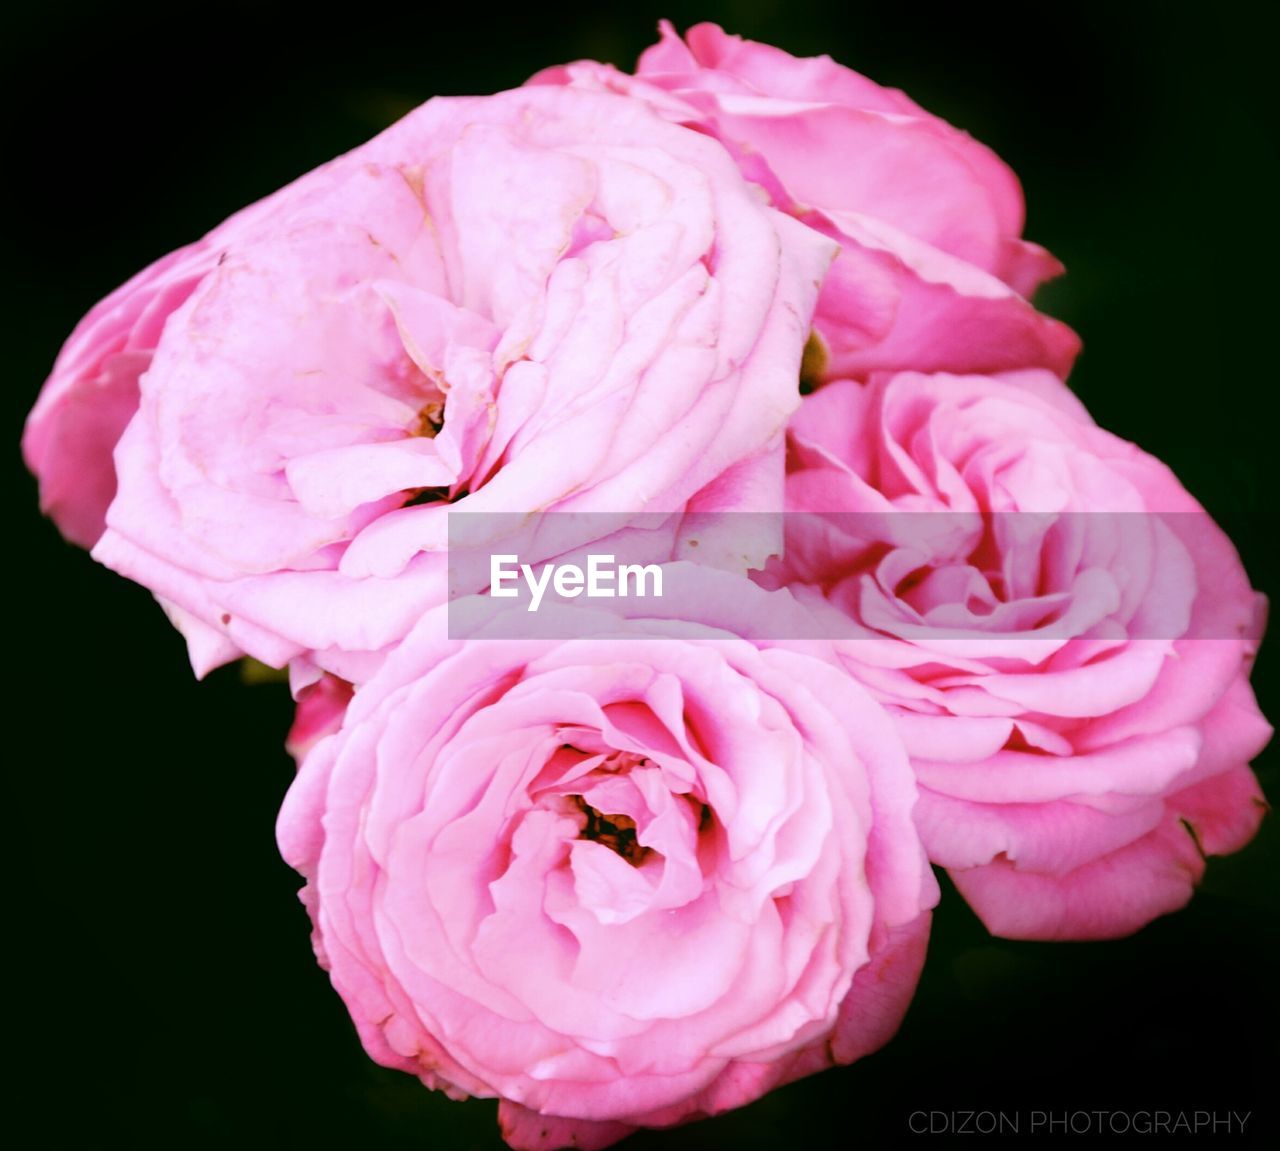 CLOSE-UP OF PINK PEONY AGAINST BLACK BACKGROUND